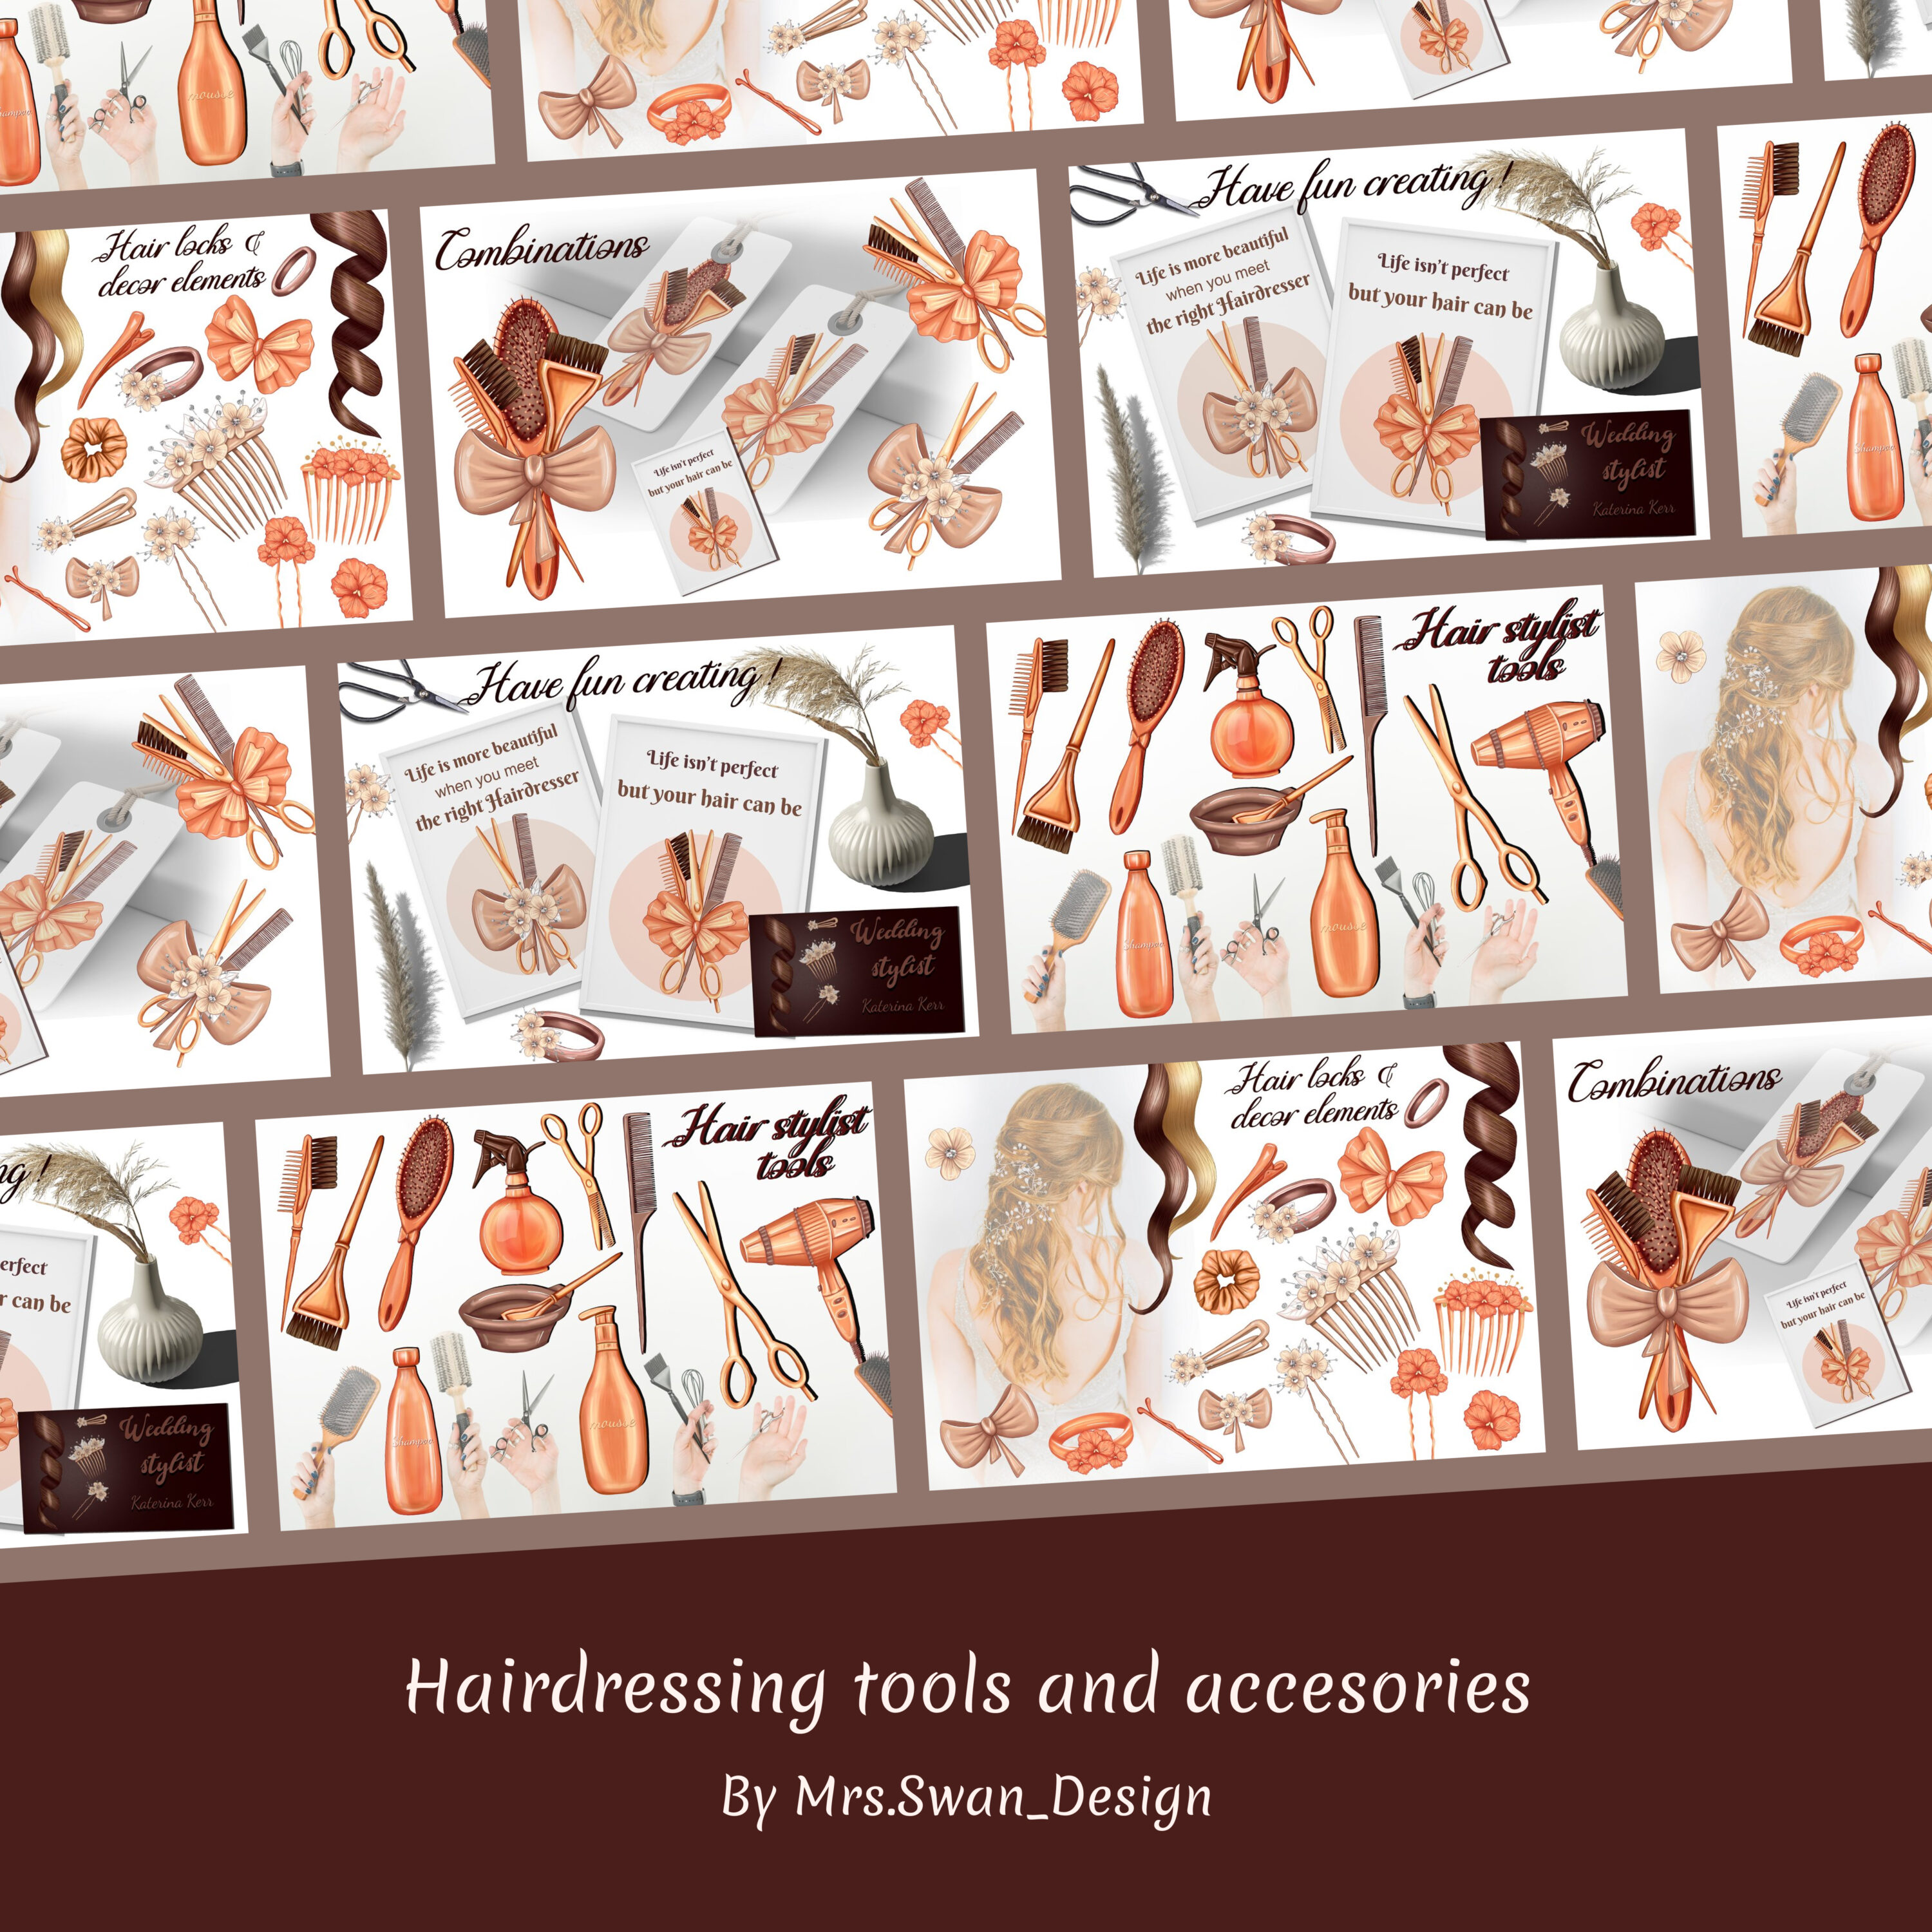 Prints of hairdressing tools and accesories.